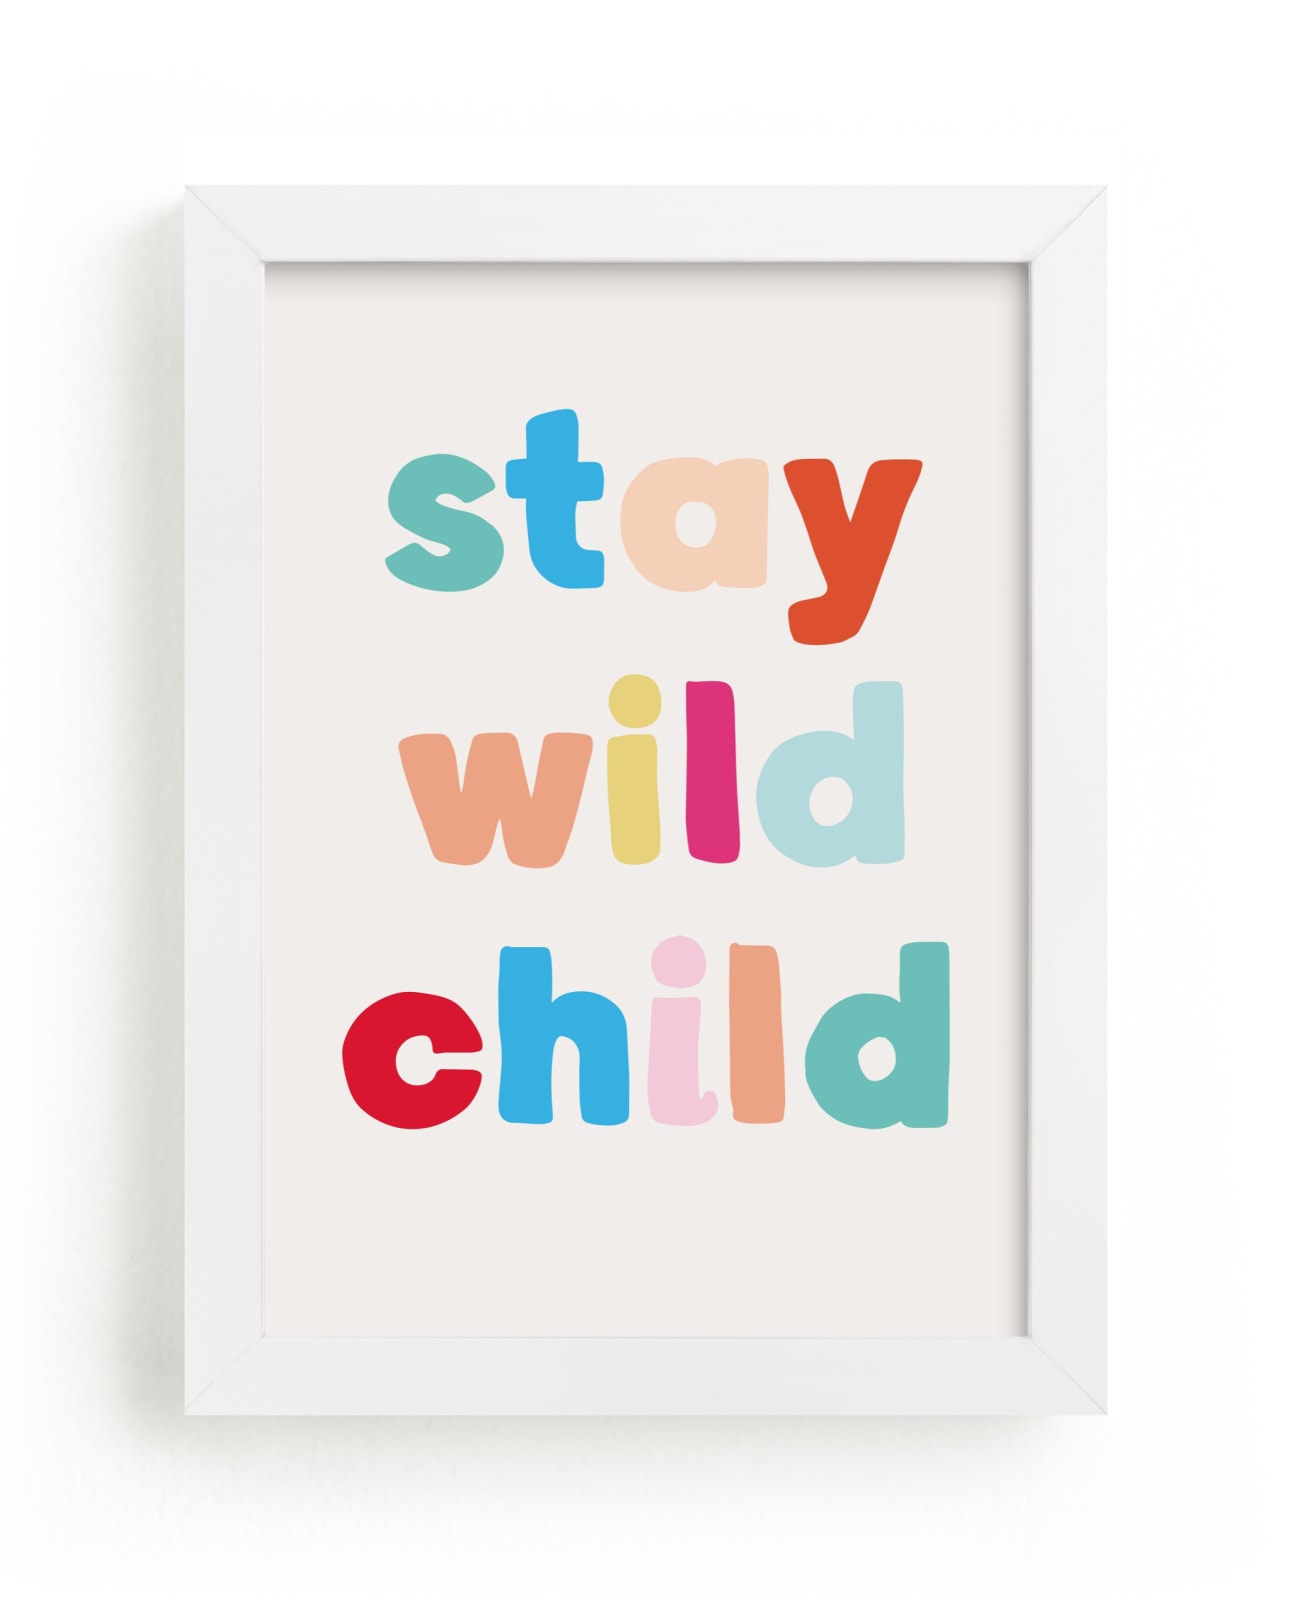 "My type I" by Creo Study in beautiful frame options and a variety of sizes.